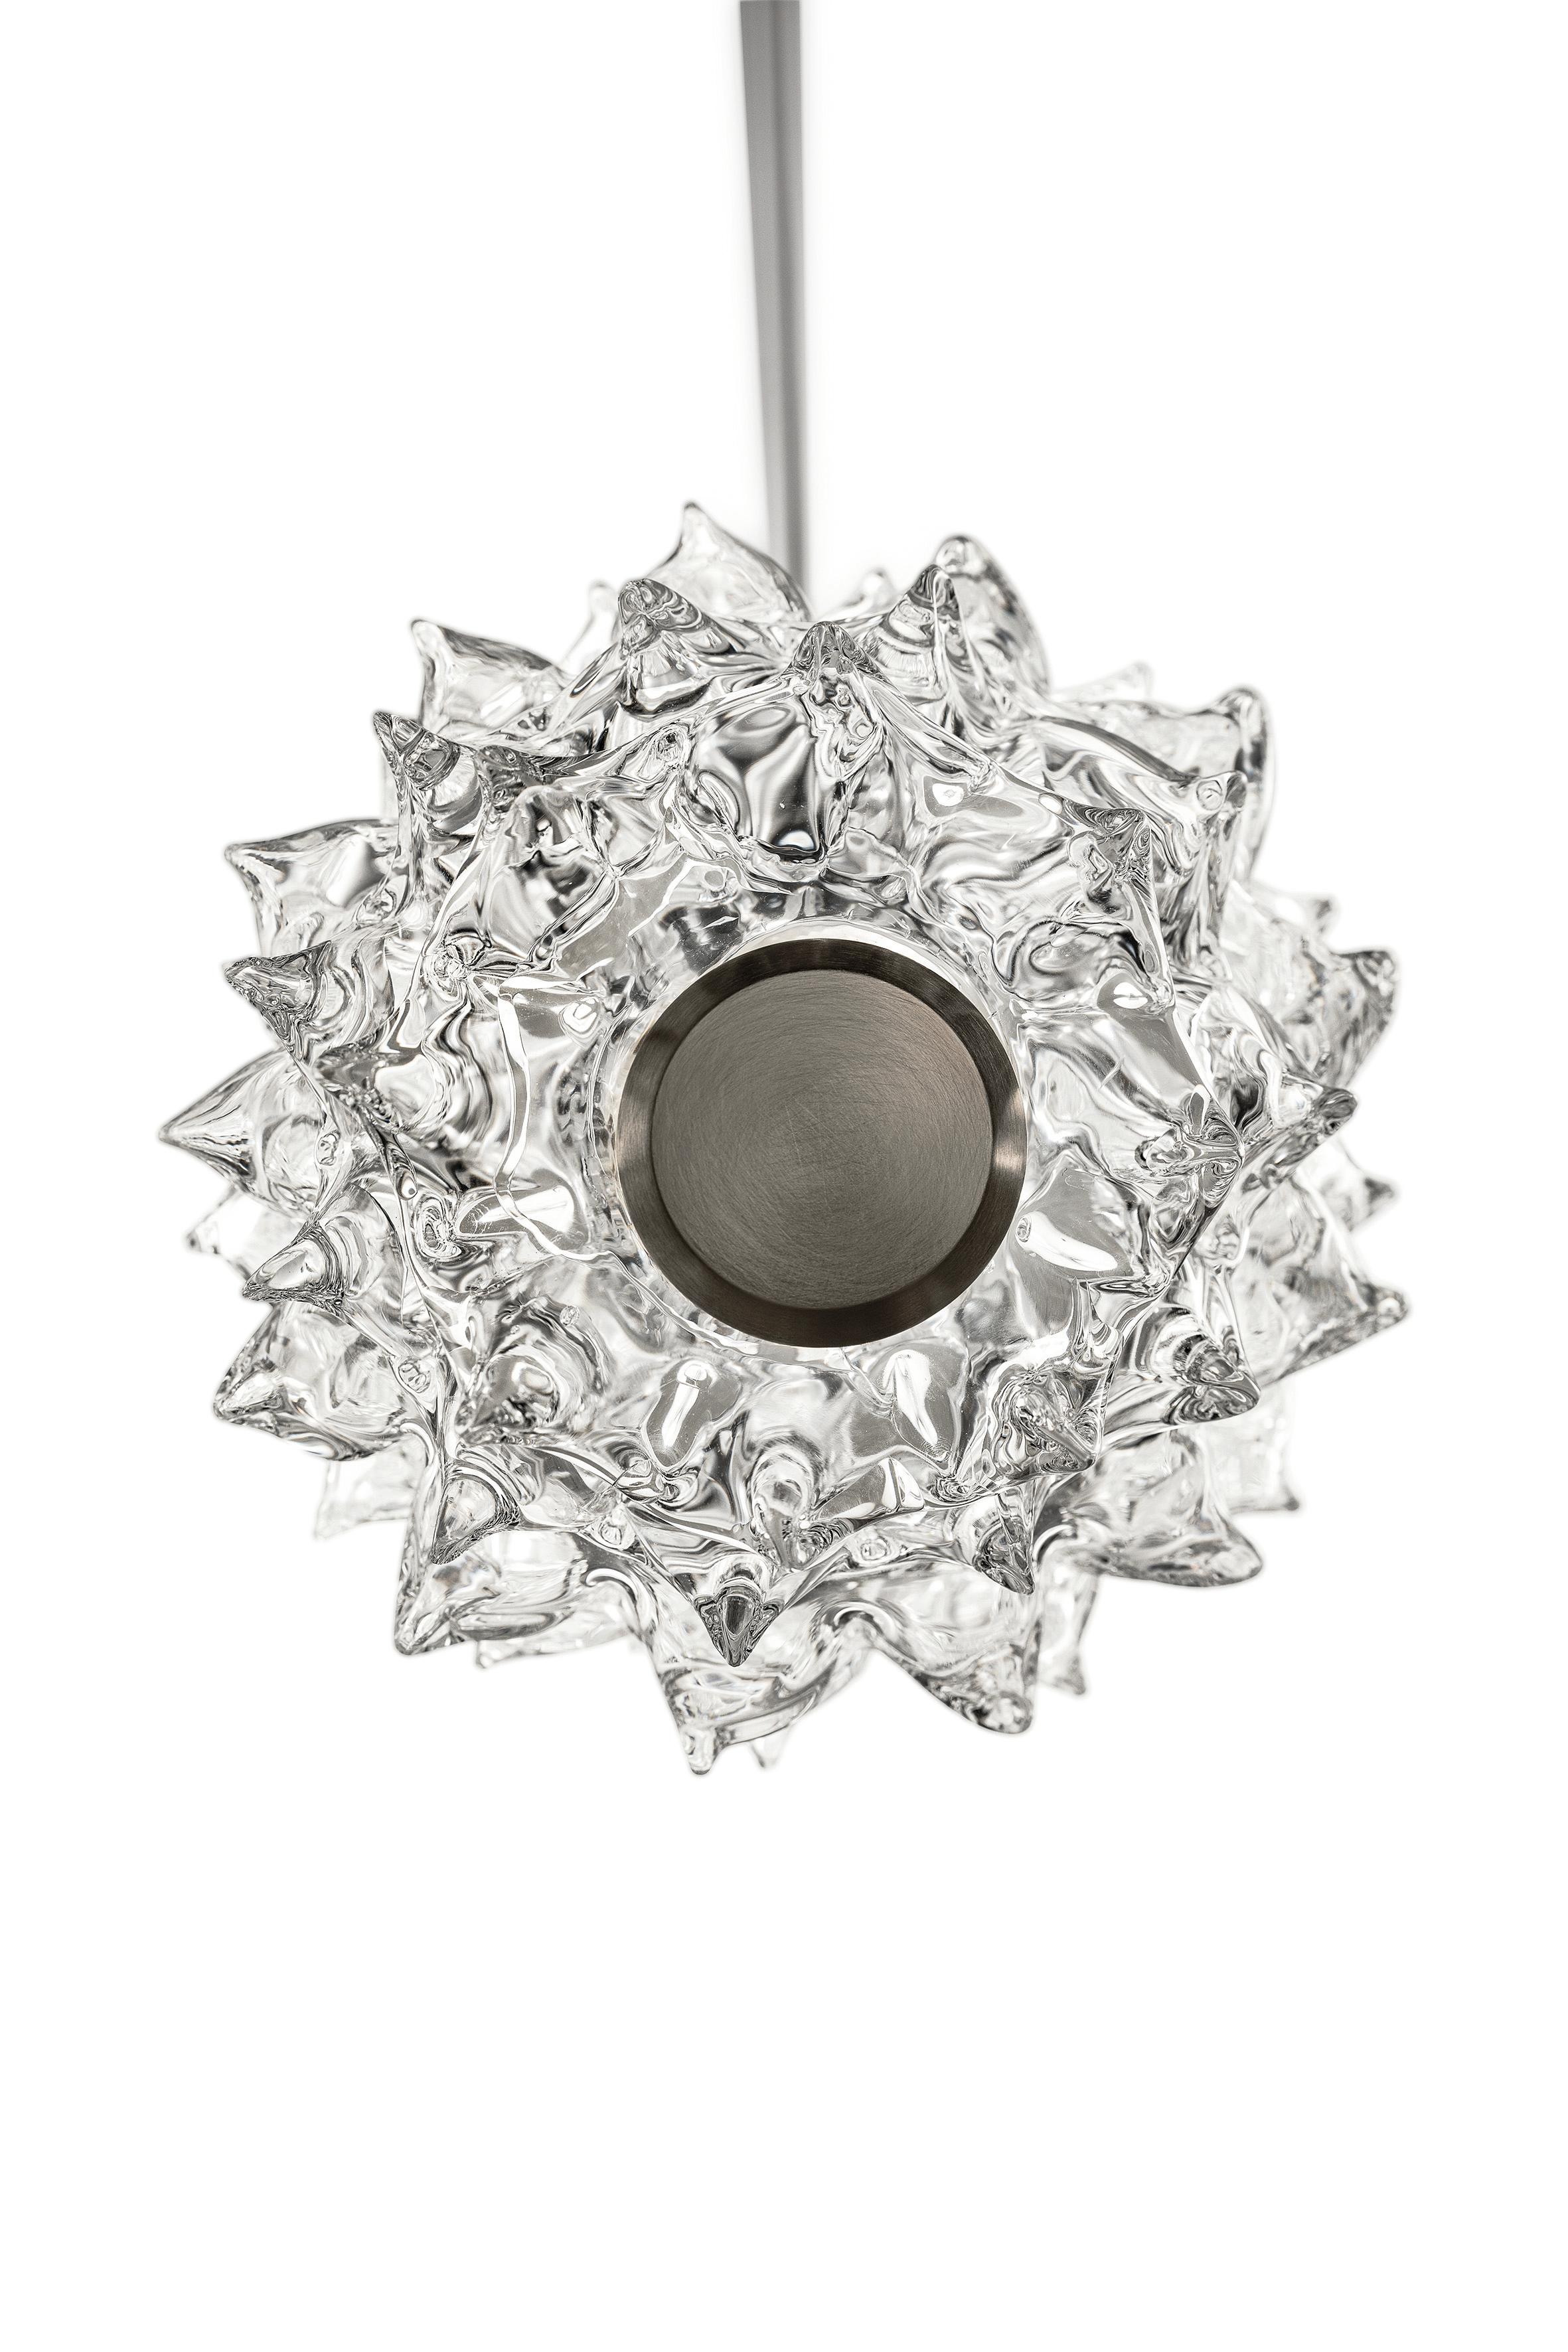 Barovier & Toso Opera 7388 Suspension Light in Crystal with Black Nickel Finish 7